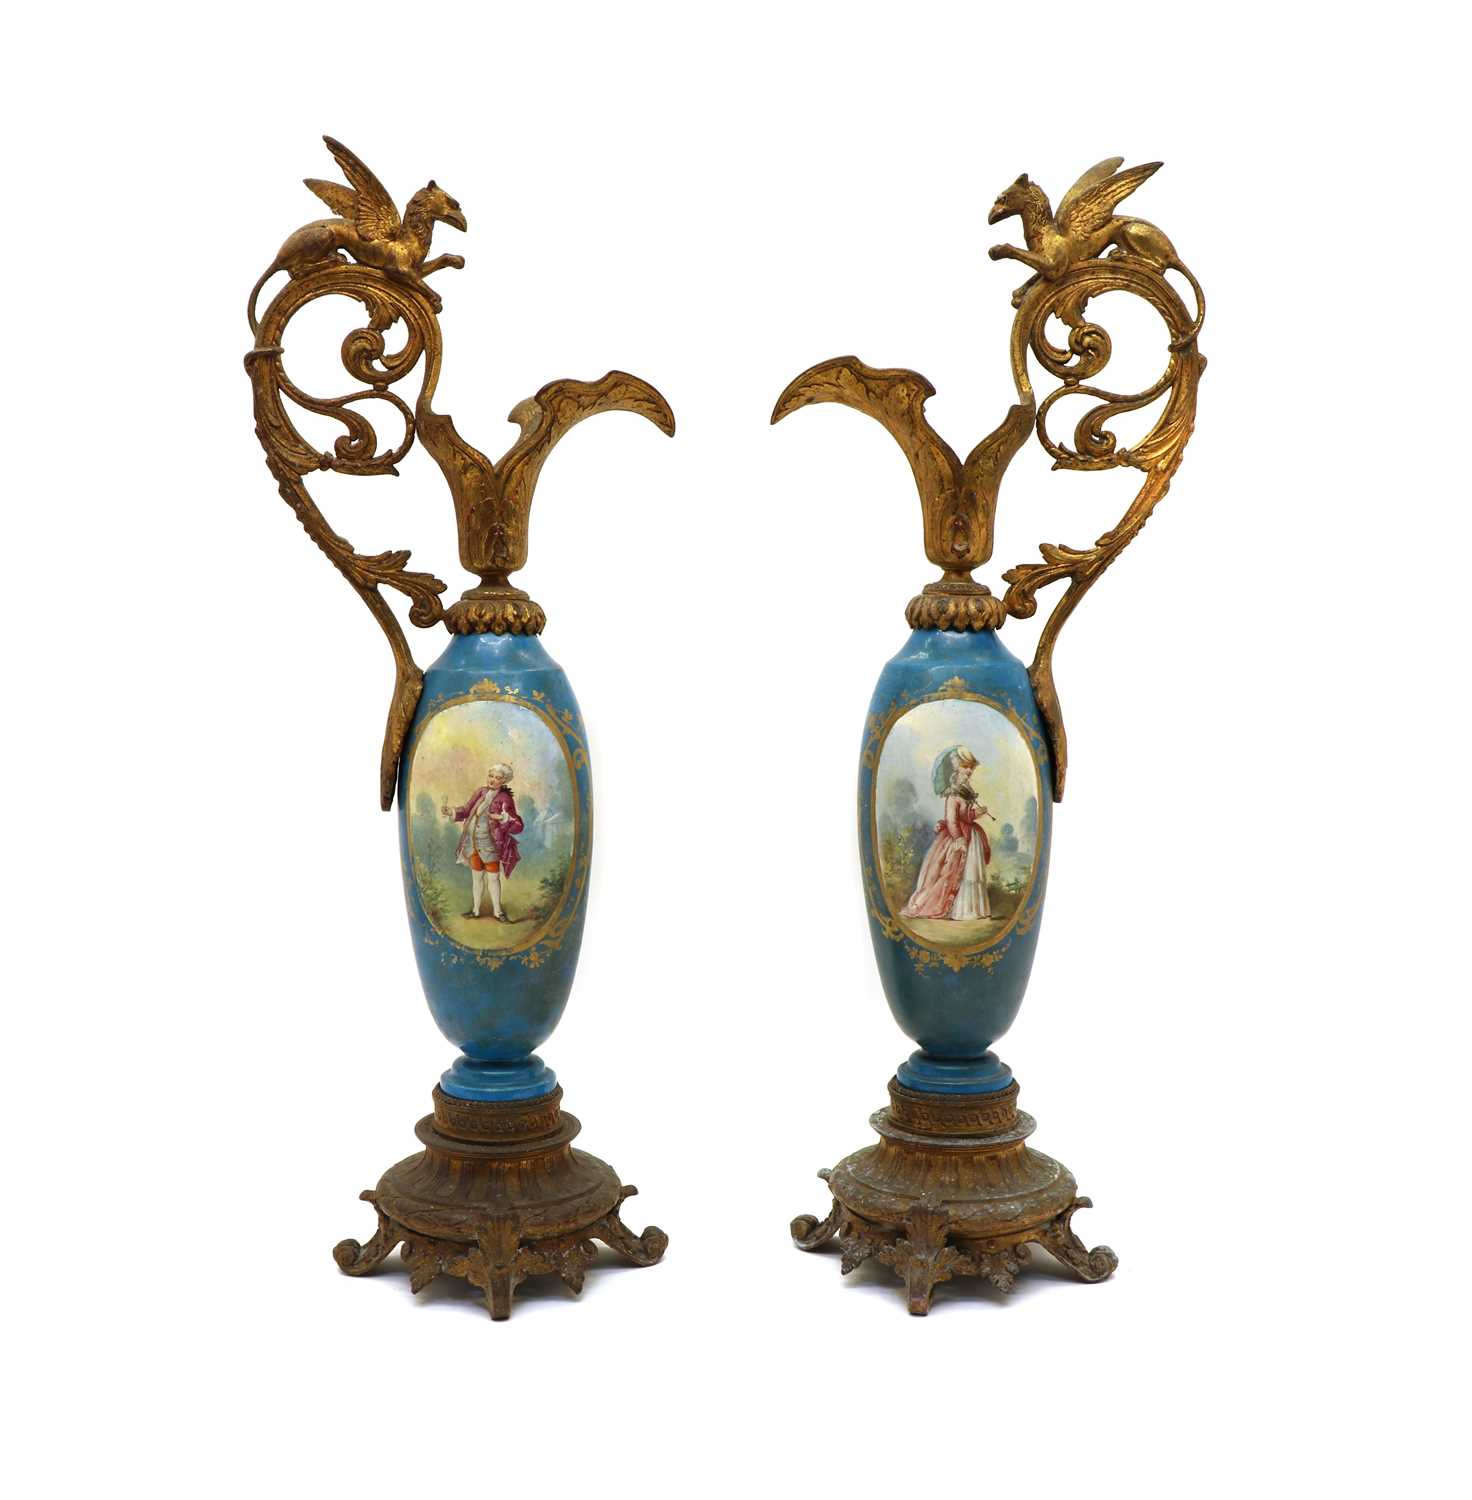 Lot 95 - A pair of single handled Sèvres style vases